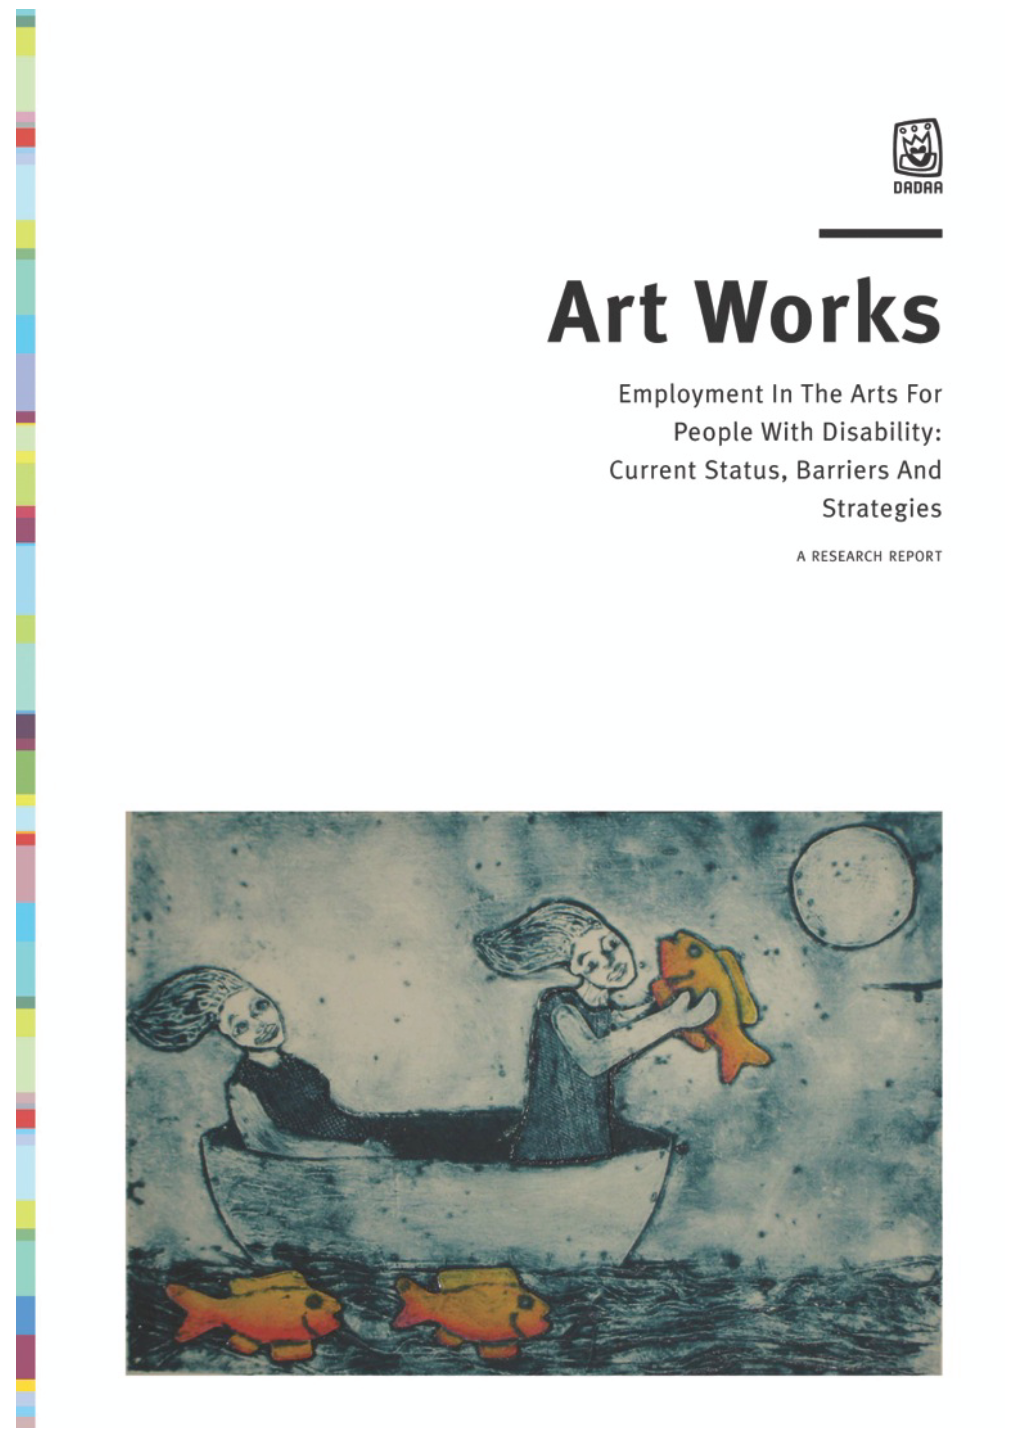 Employment in the Arts for People with Disability: Current Status, Barriers and Strategies